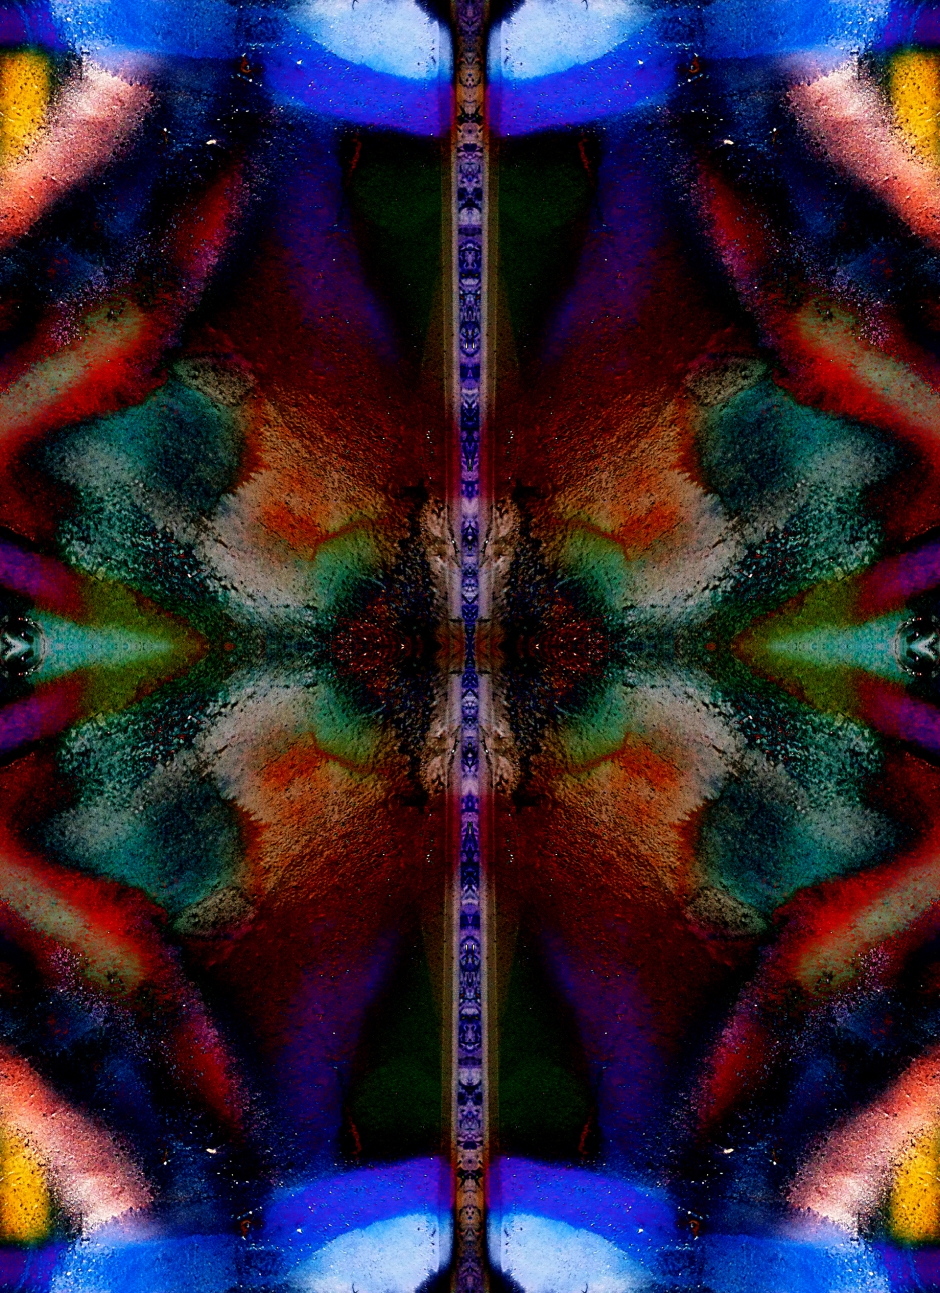 "UNTITLED 30" is a bonus track so to speak, a visual bonus track of new tribal psychedelic psychonaut art and image by Sacred Square Art and Design in co-operation with Flow Lab Co-Creative Syndicate. ©2013